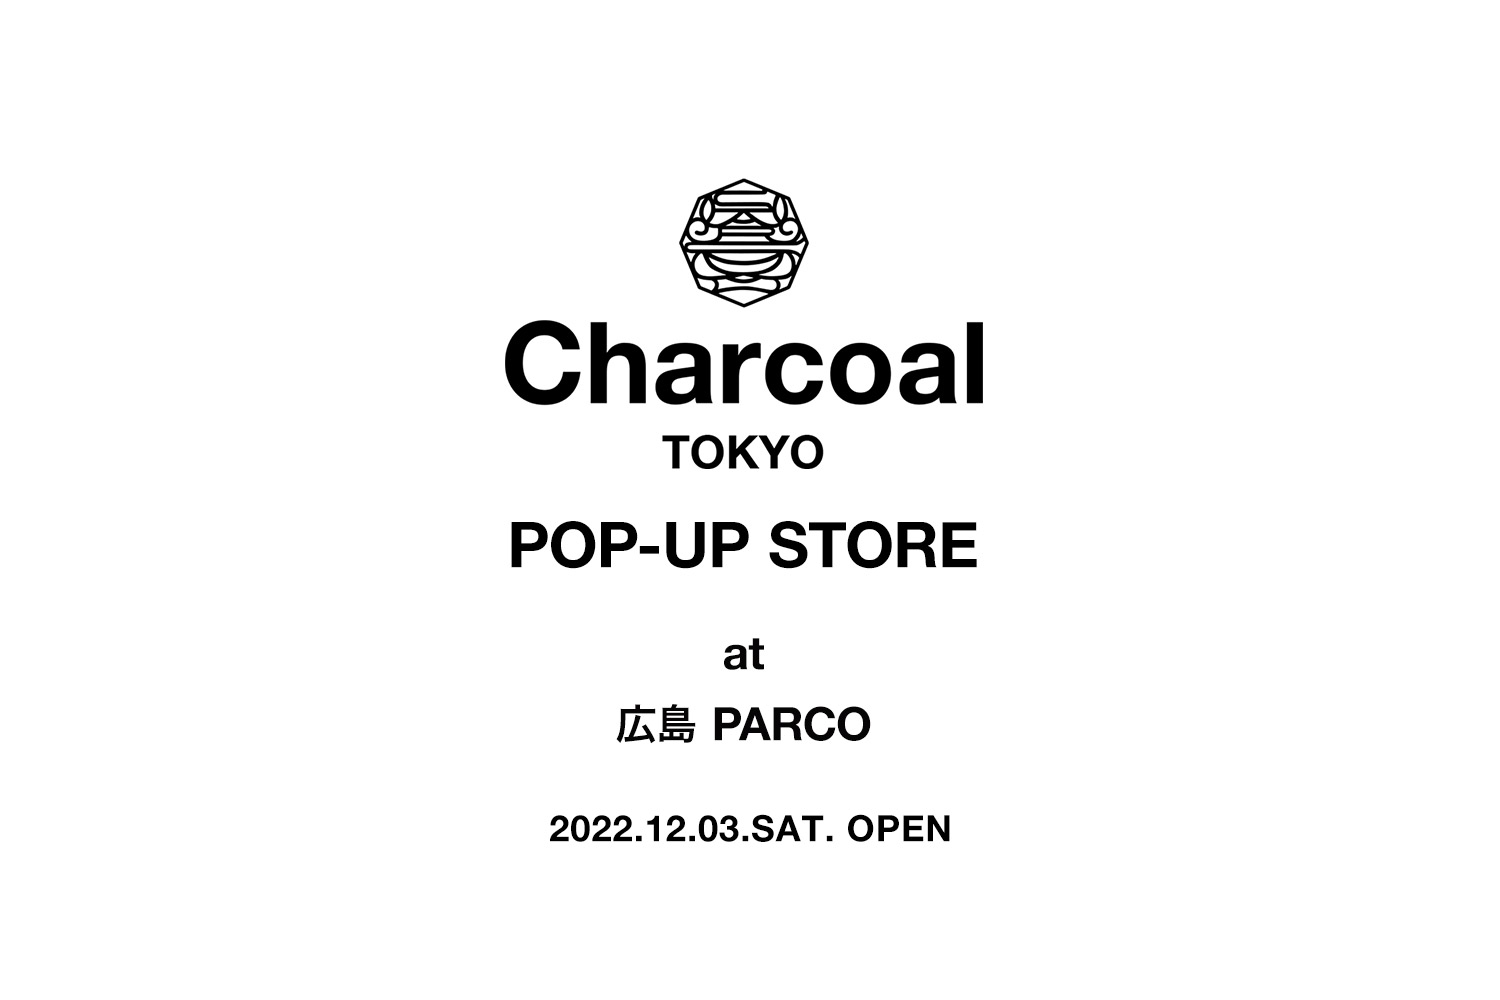 〈Charcoal TOKYO〉 Pop-Up Store at 広島 PARCO